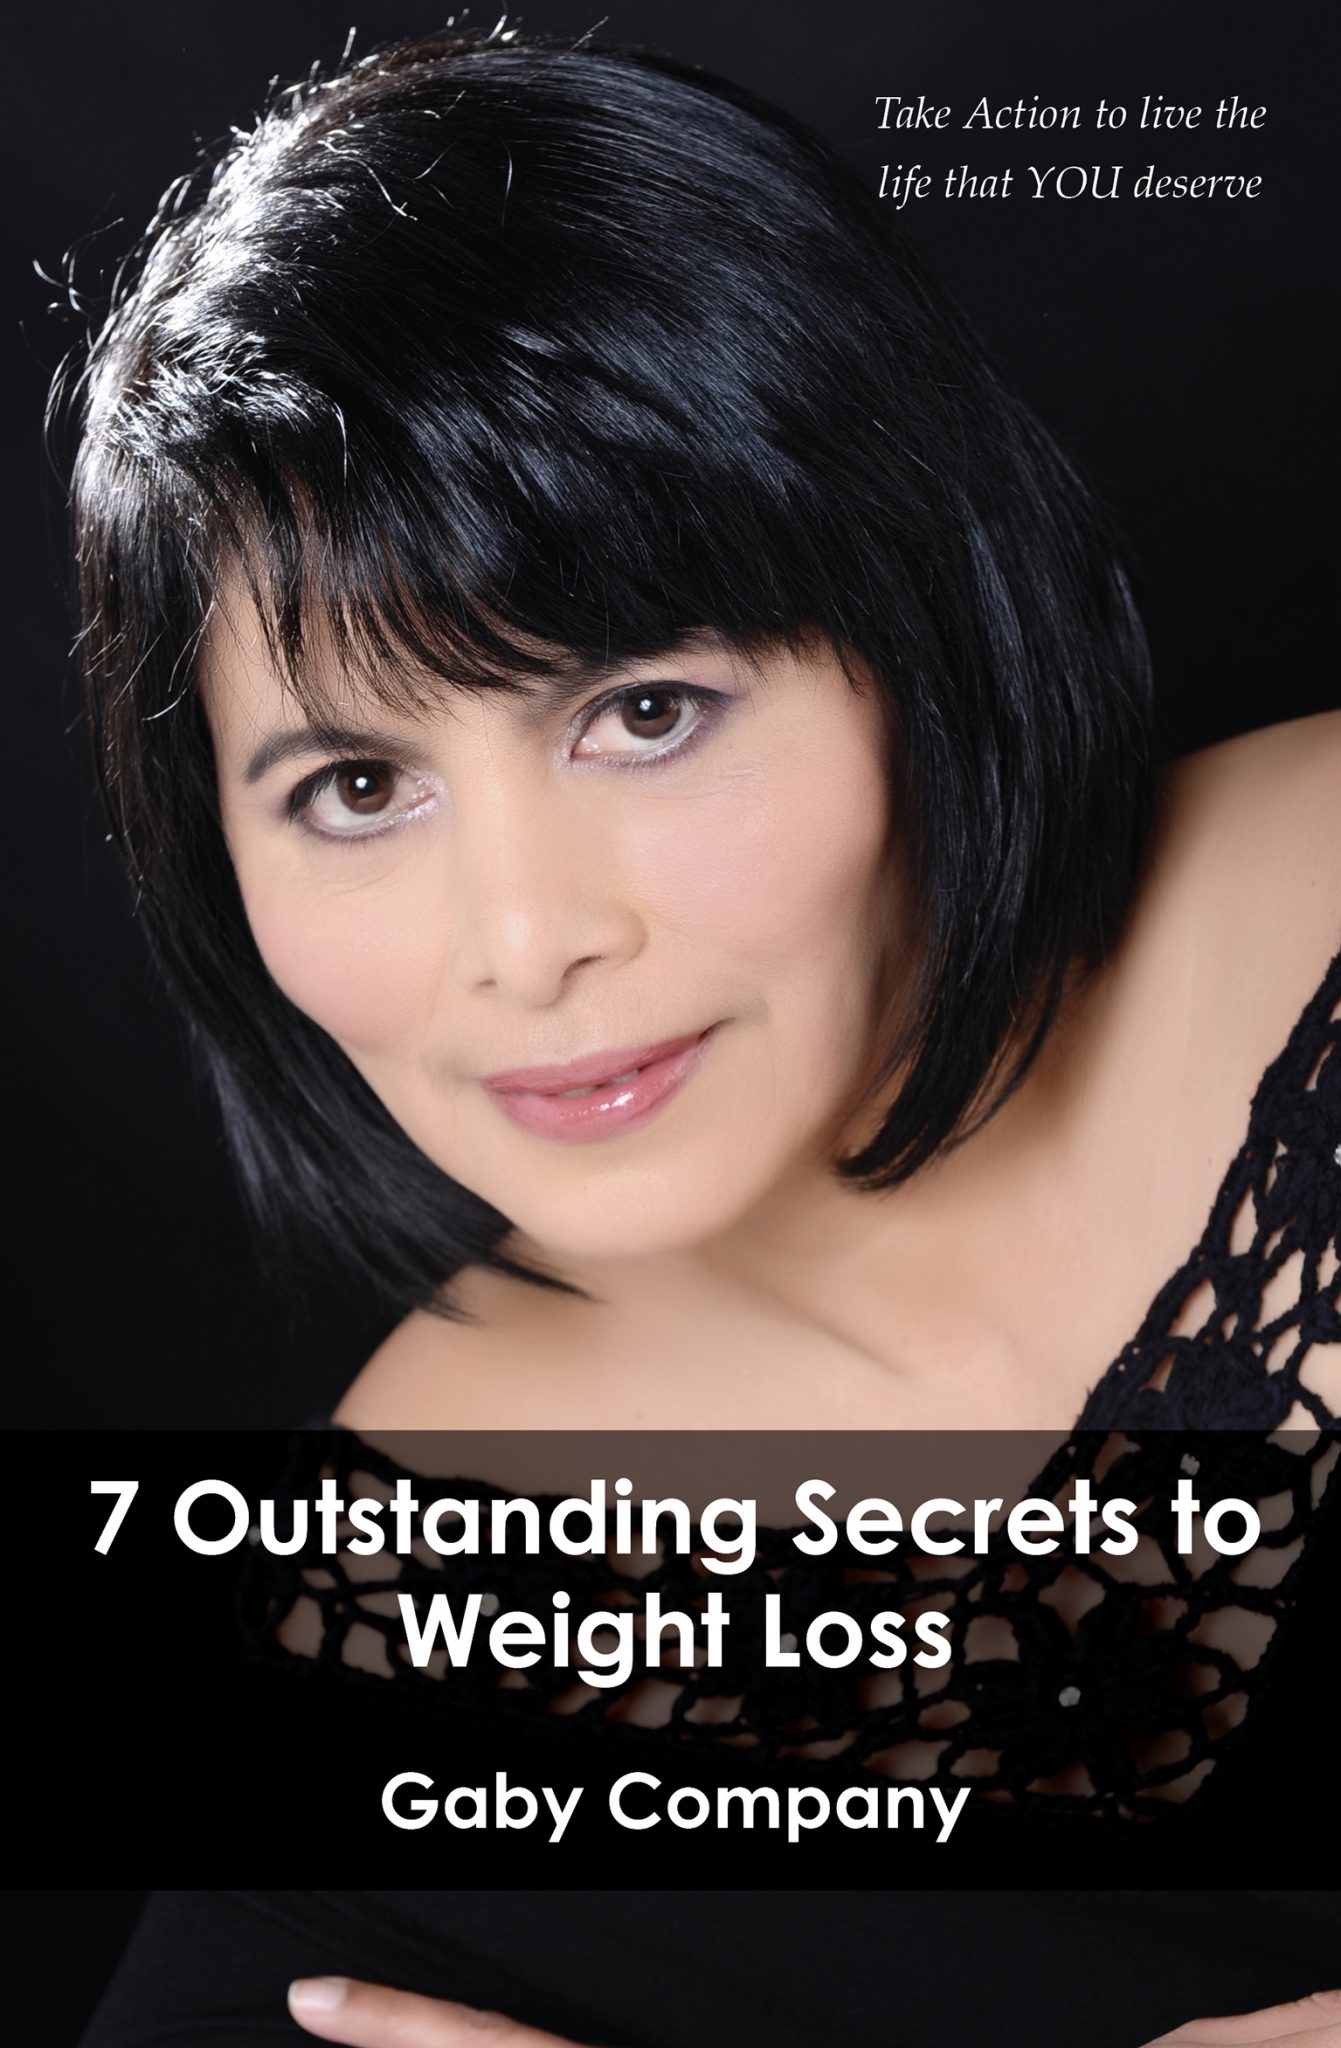 7 Outstanding Secrets to Weight Loss